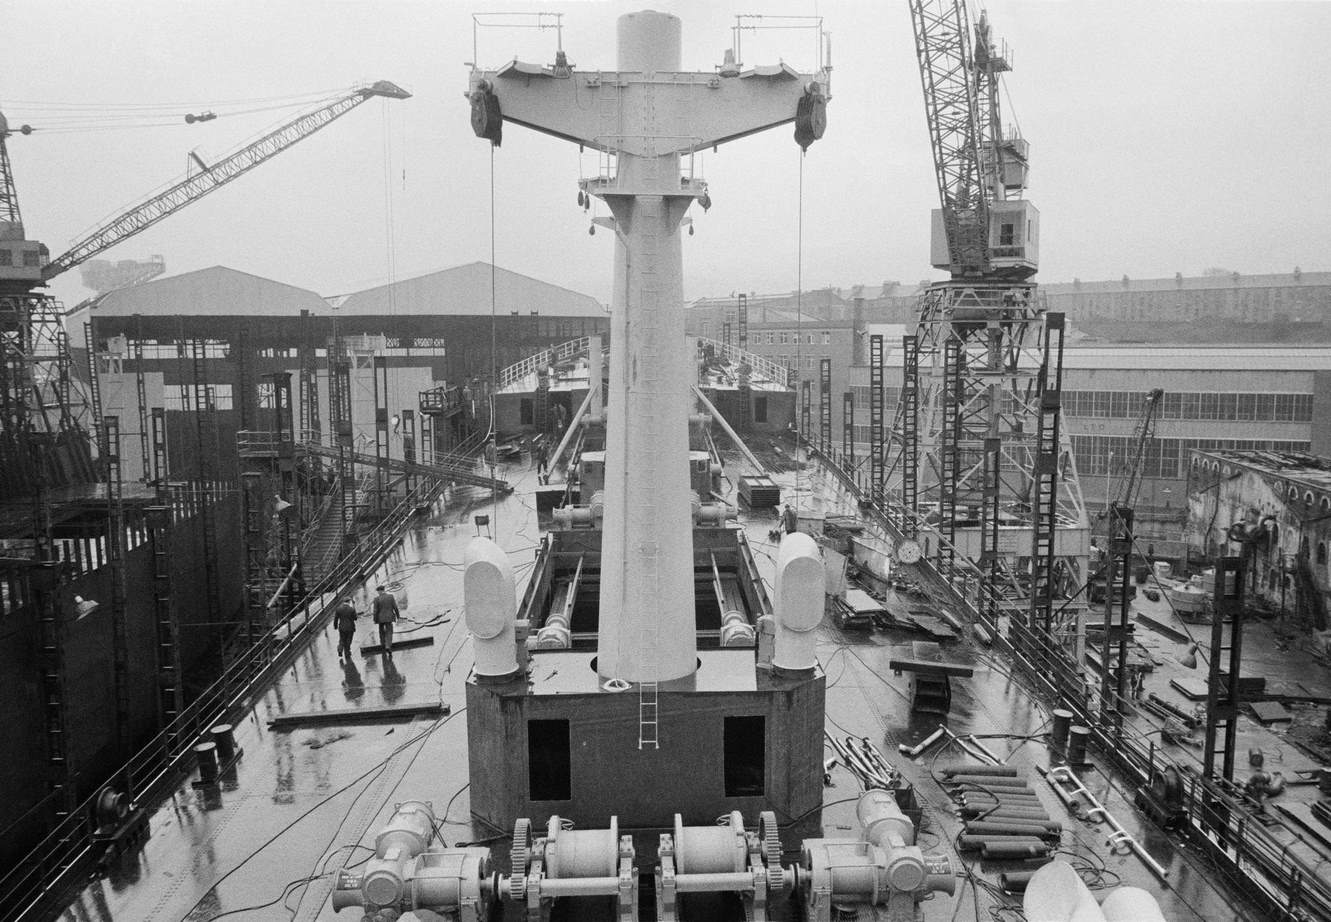 A vessel under construction at a shipyard in Greenock on the Clyde, Scotland, 1963.